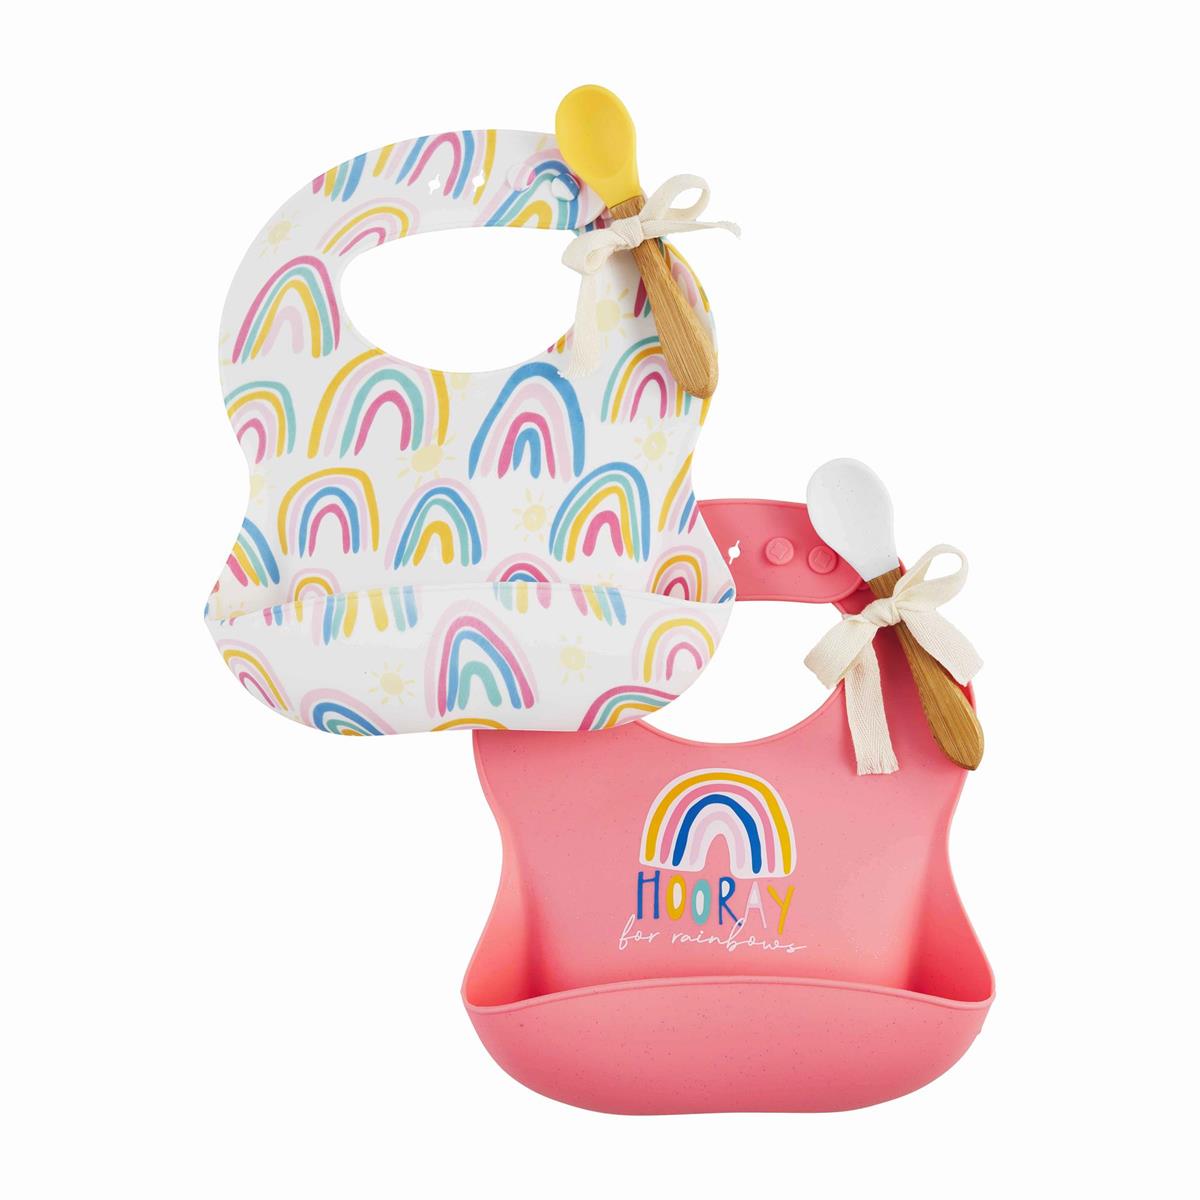 two silicone bibs with rainbow designs and a spoon tied to it.